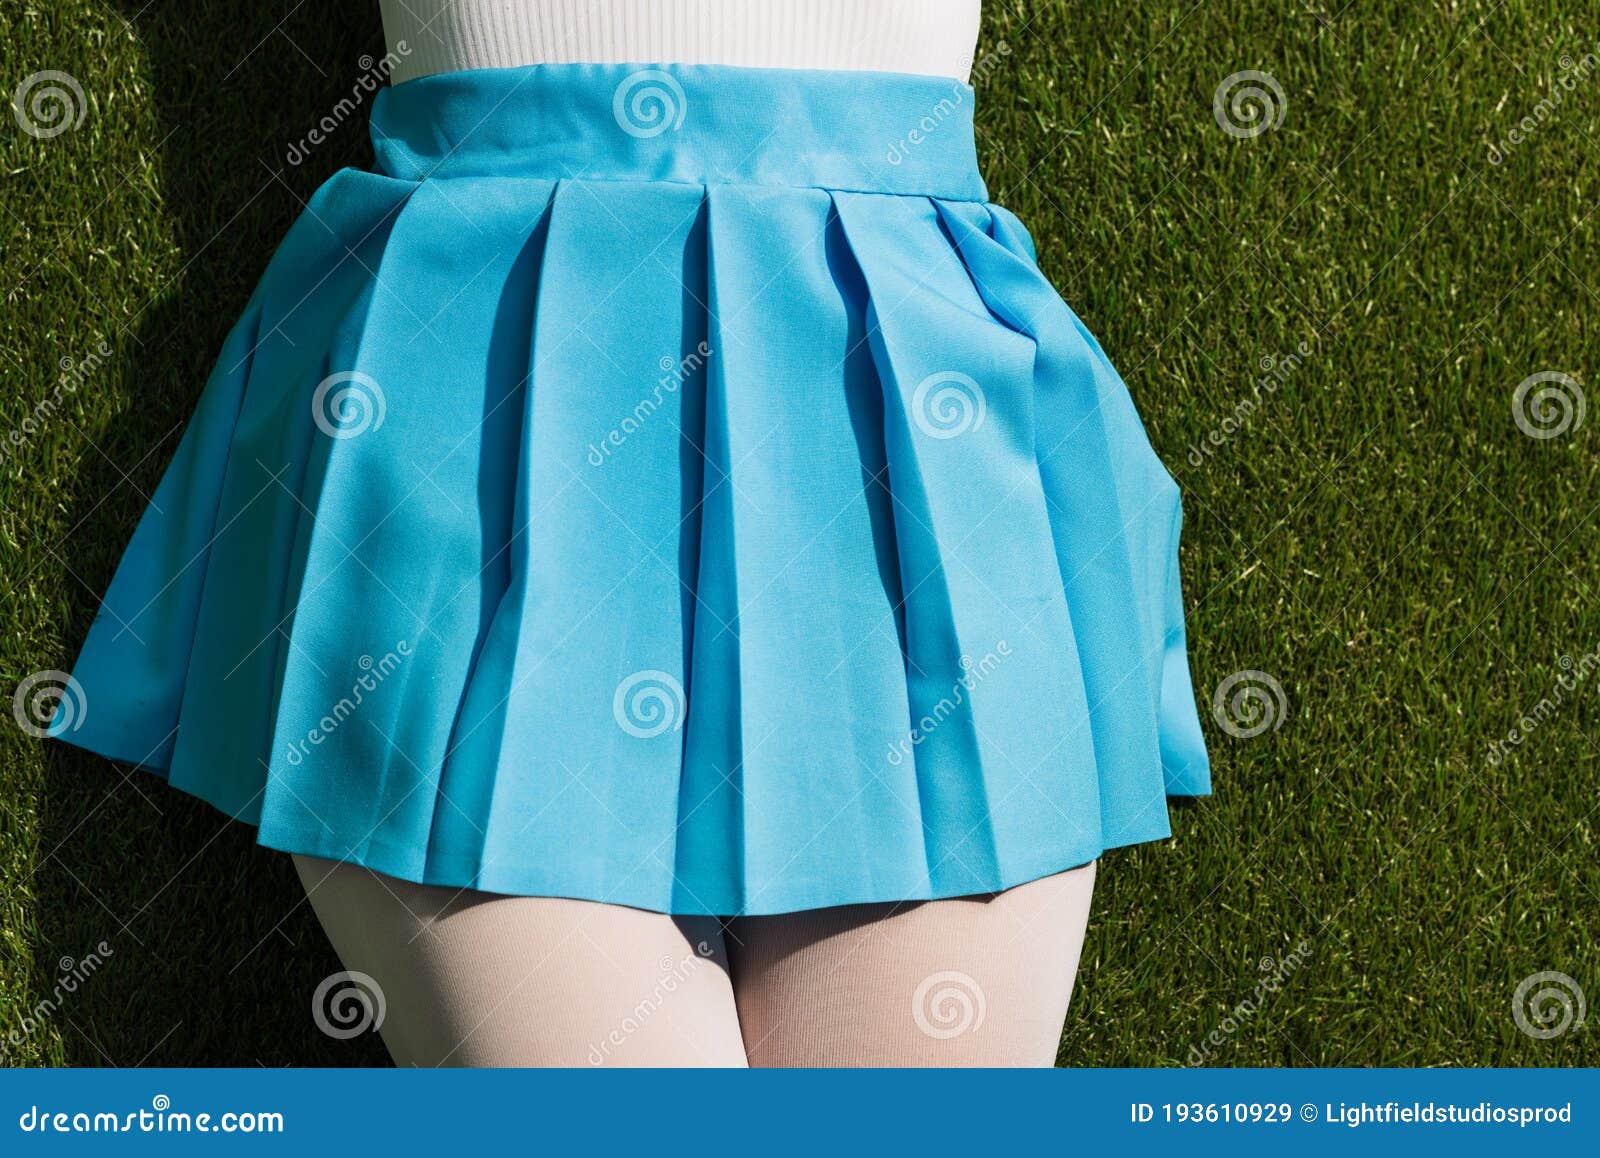 View of Girl in Blue Skirt Lying on Grass Stock Image - Image of ...